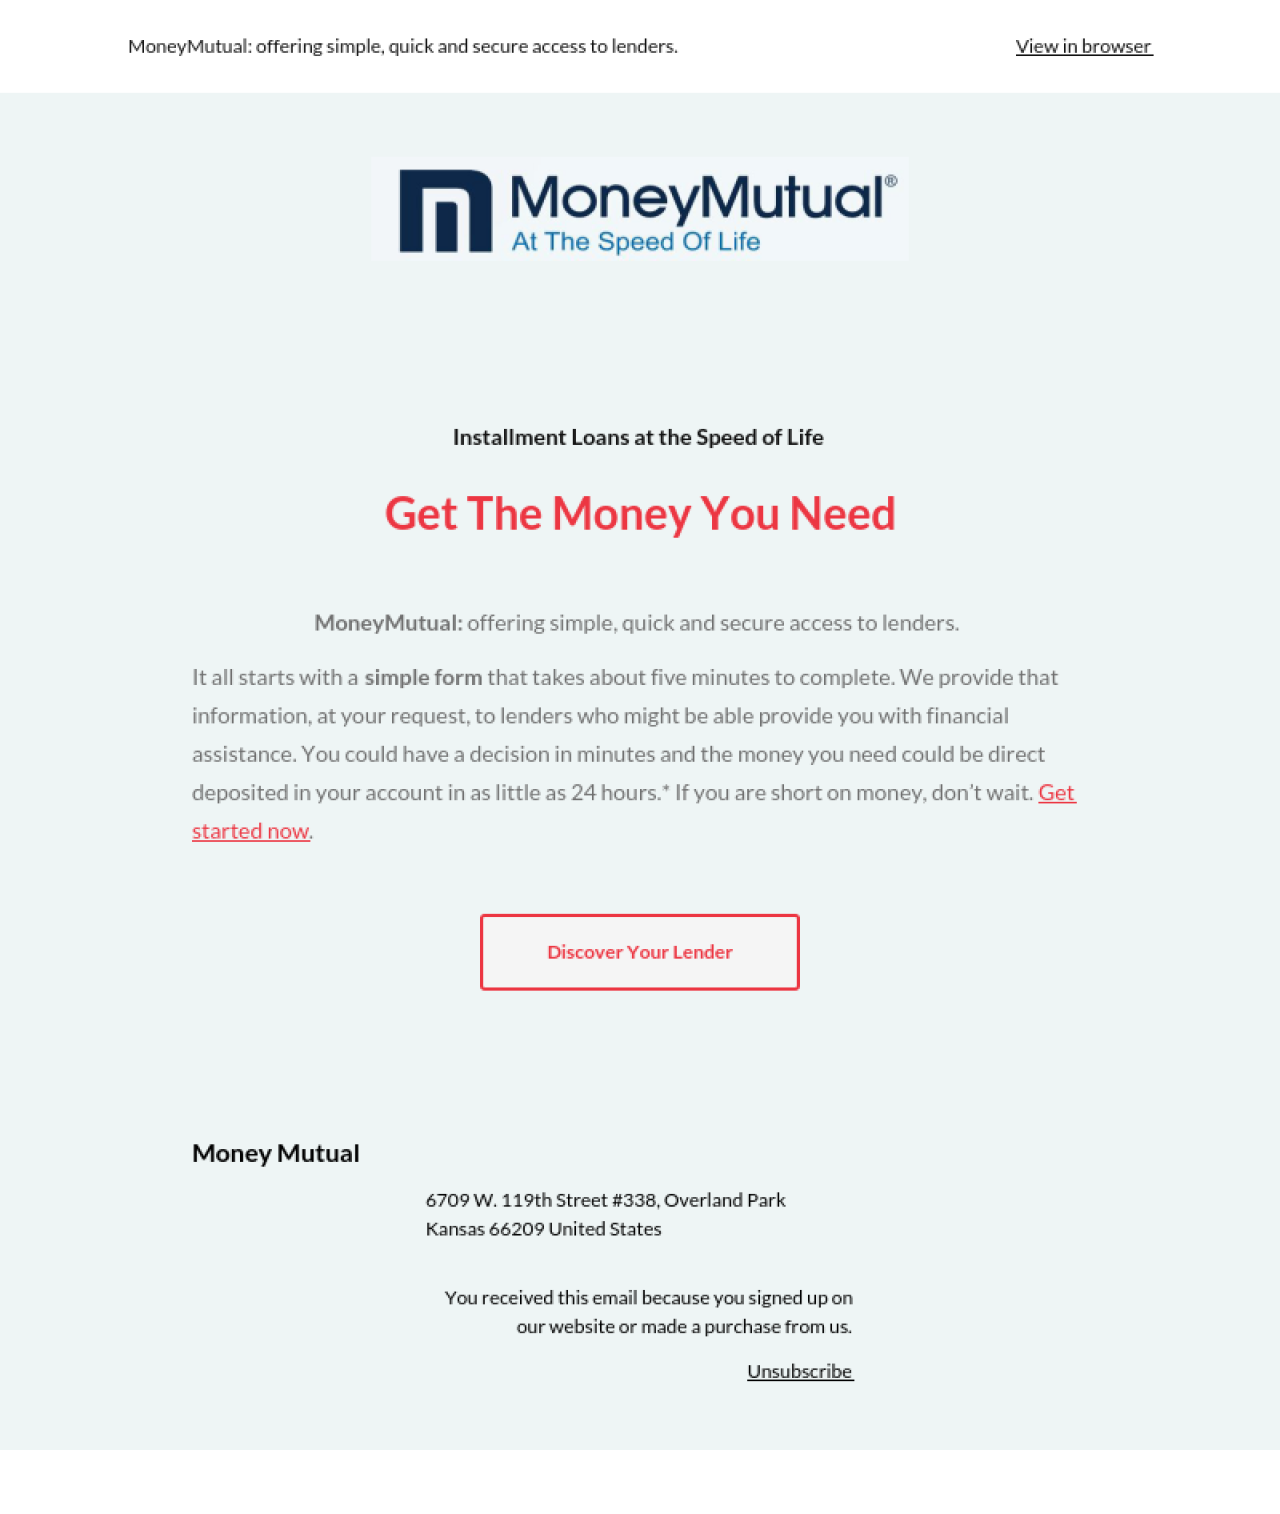 Money Mutual example - Made with MailerLite